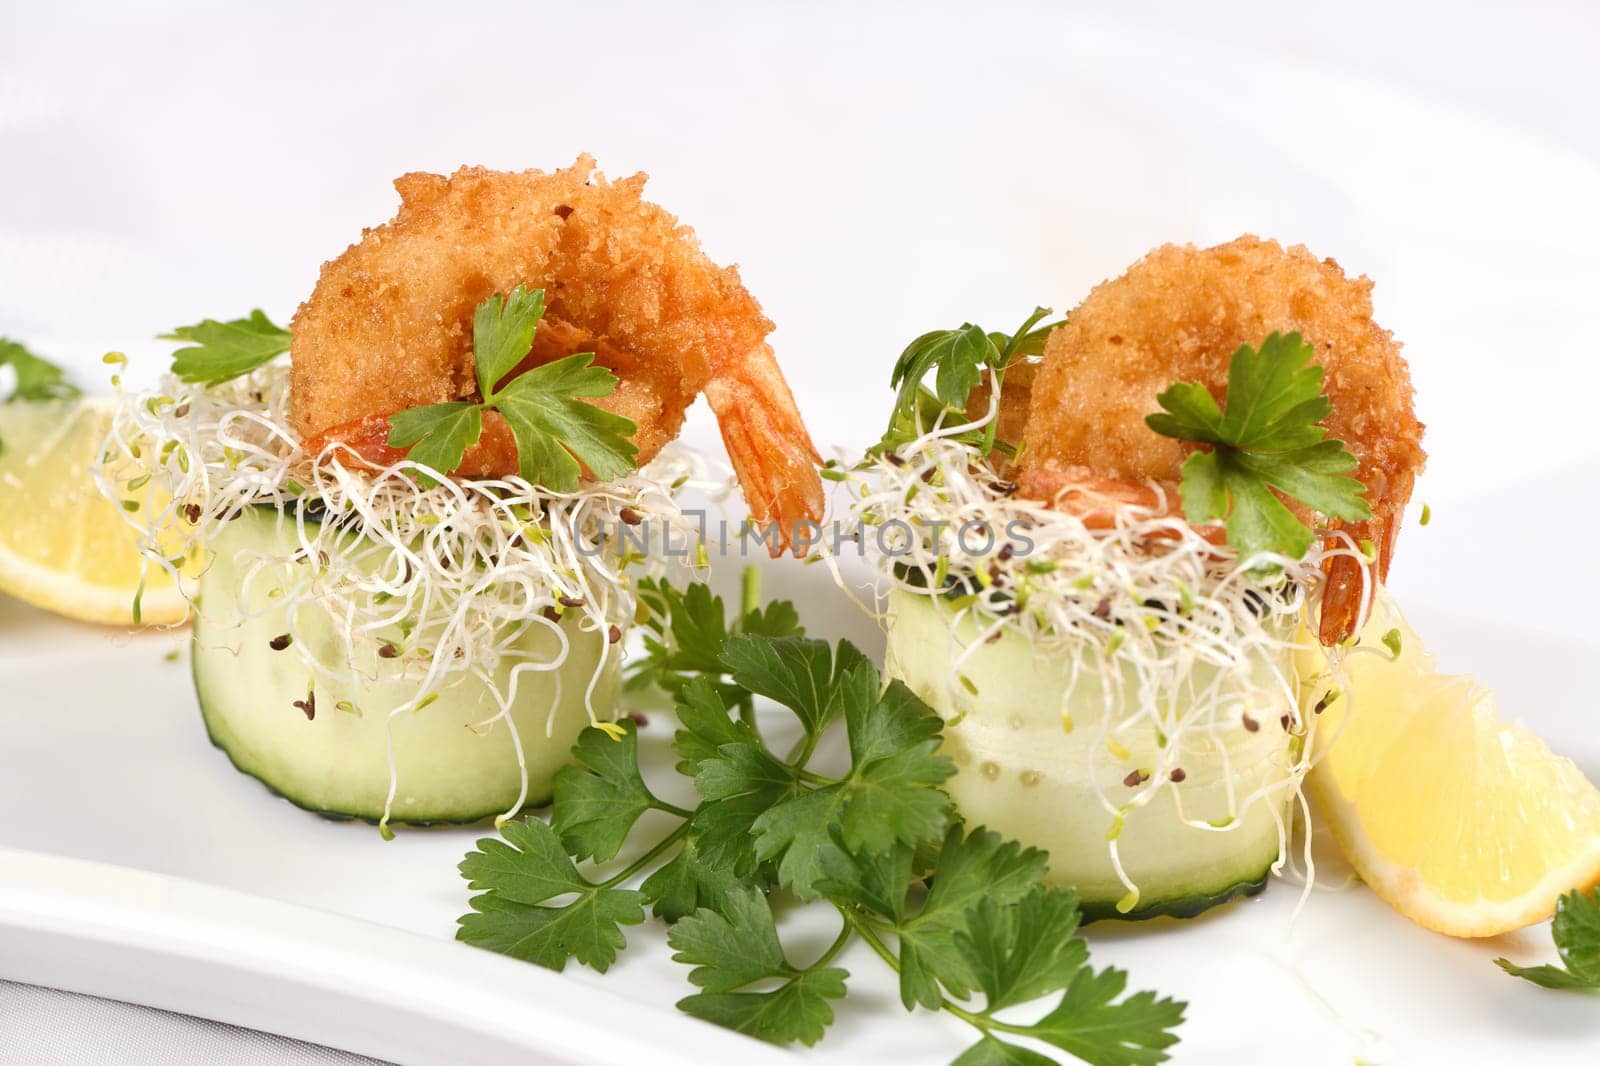 Cucumber and shrimp appetizer by Apolonia